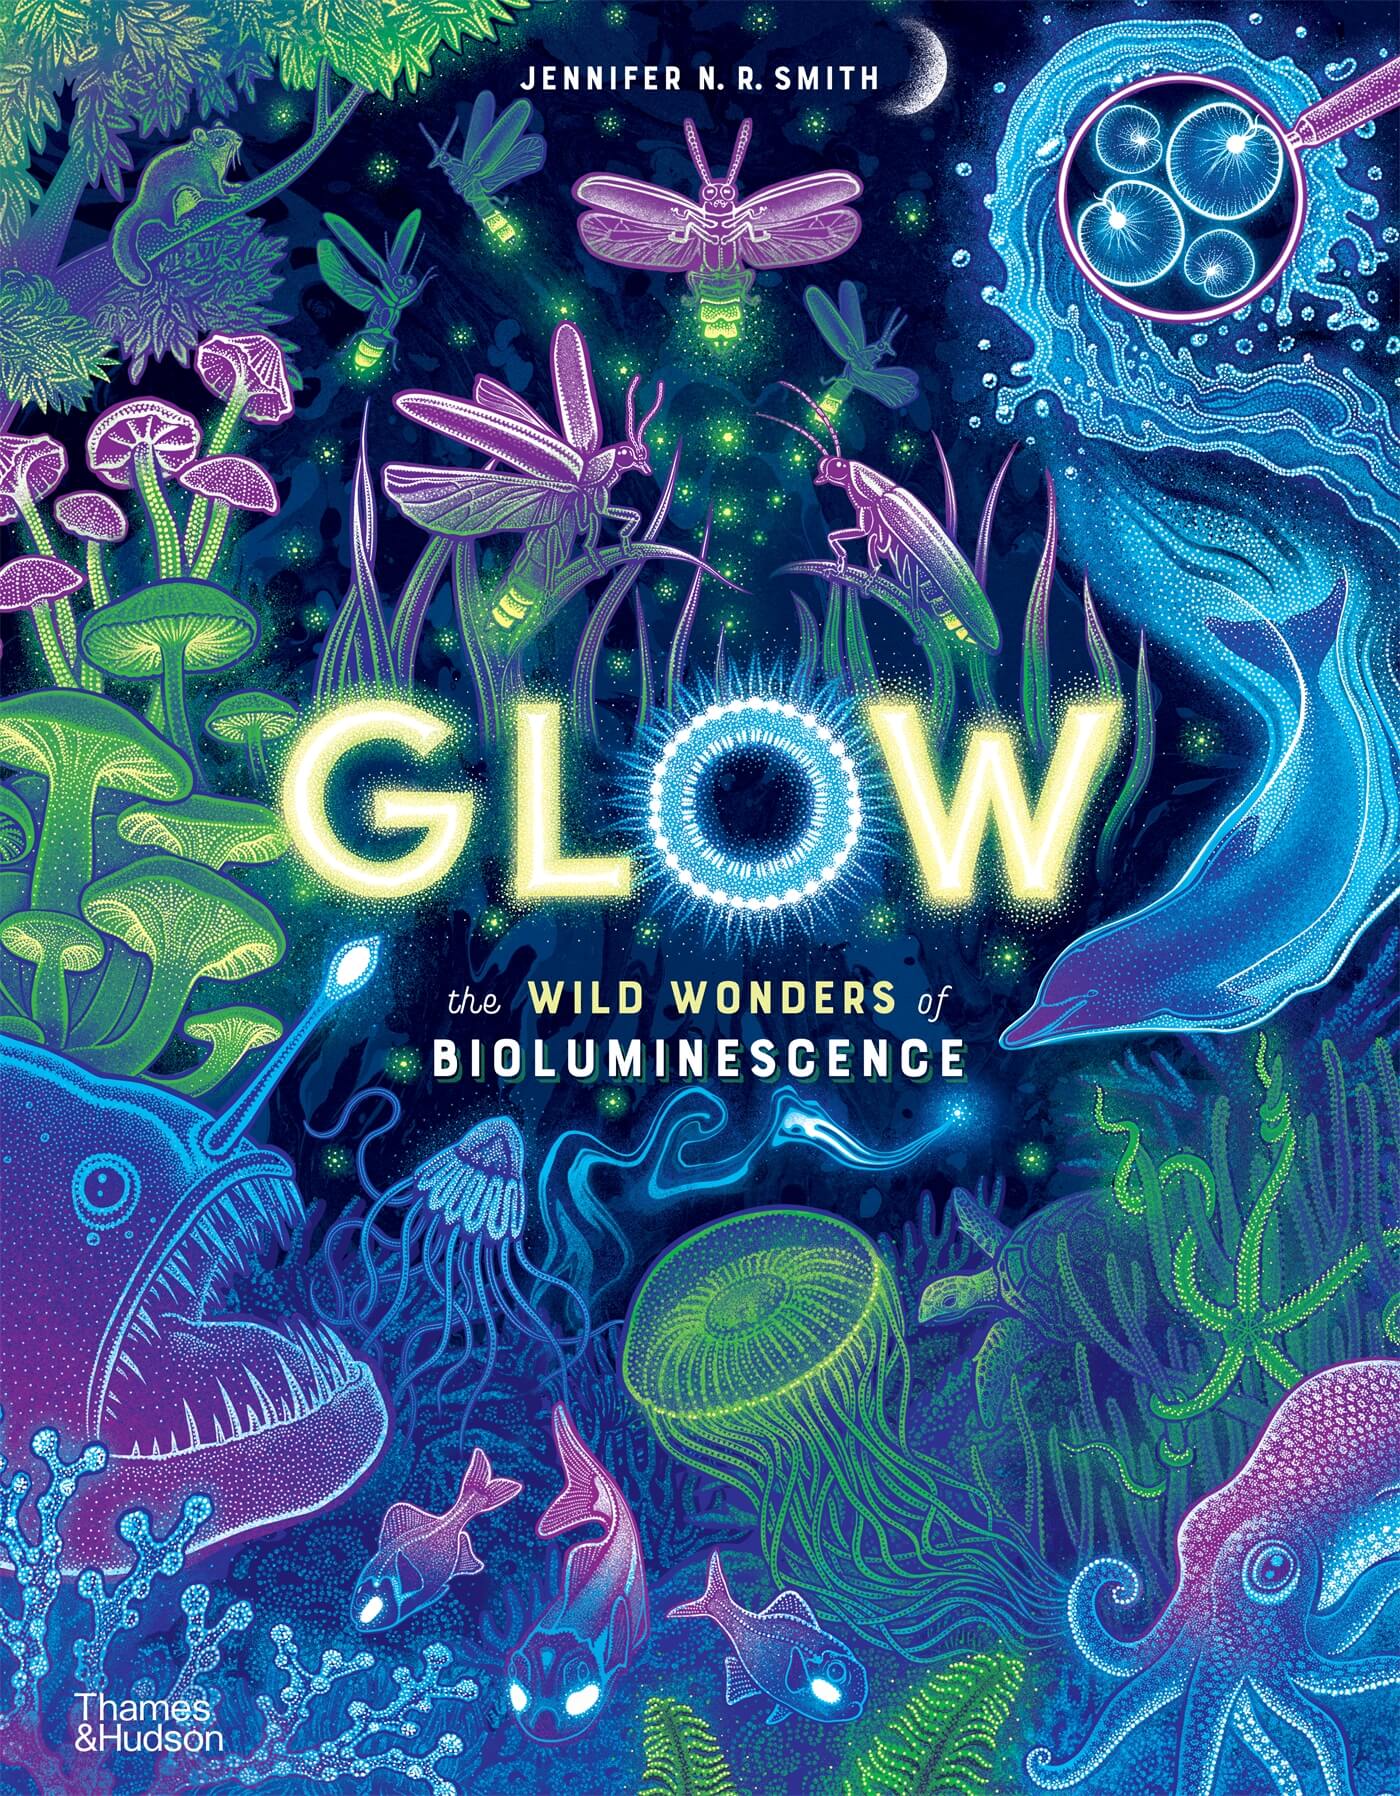 Cover image for Glow. Blue, purple, green and yellow bioluminescent creatures surrounding title in center.